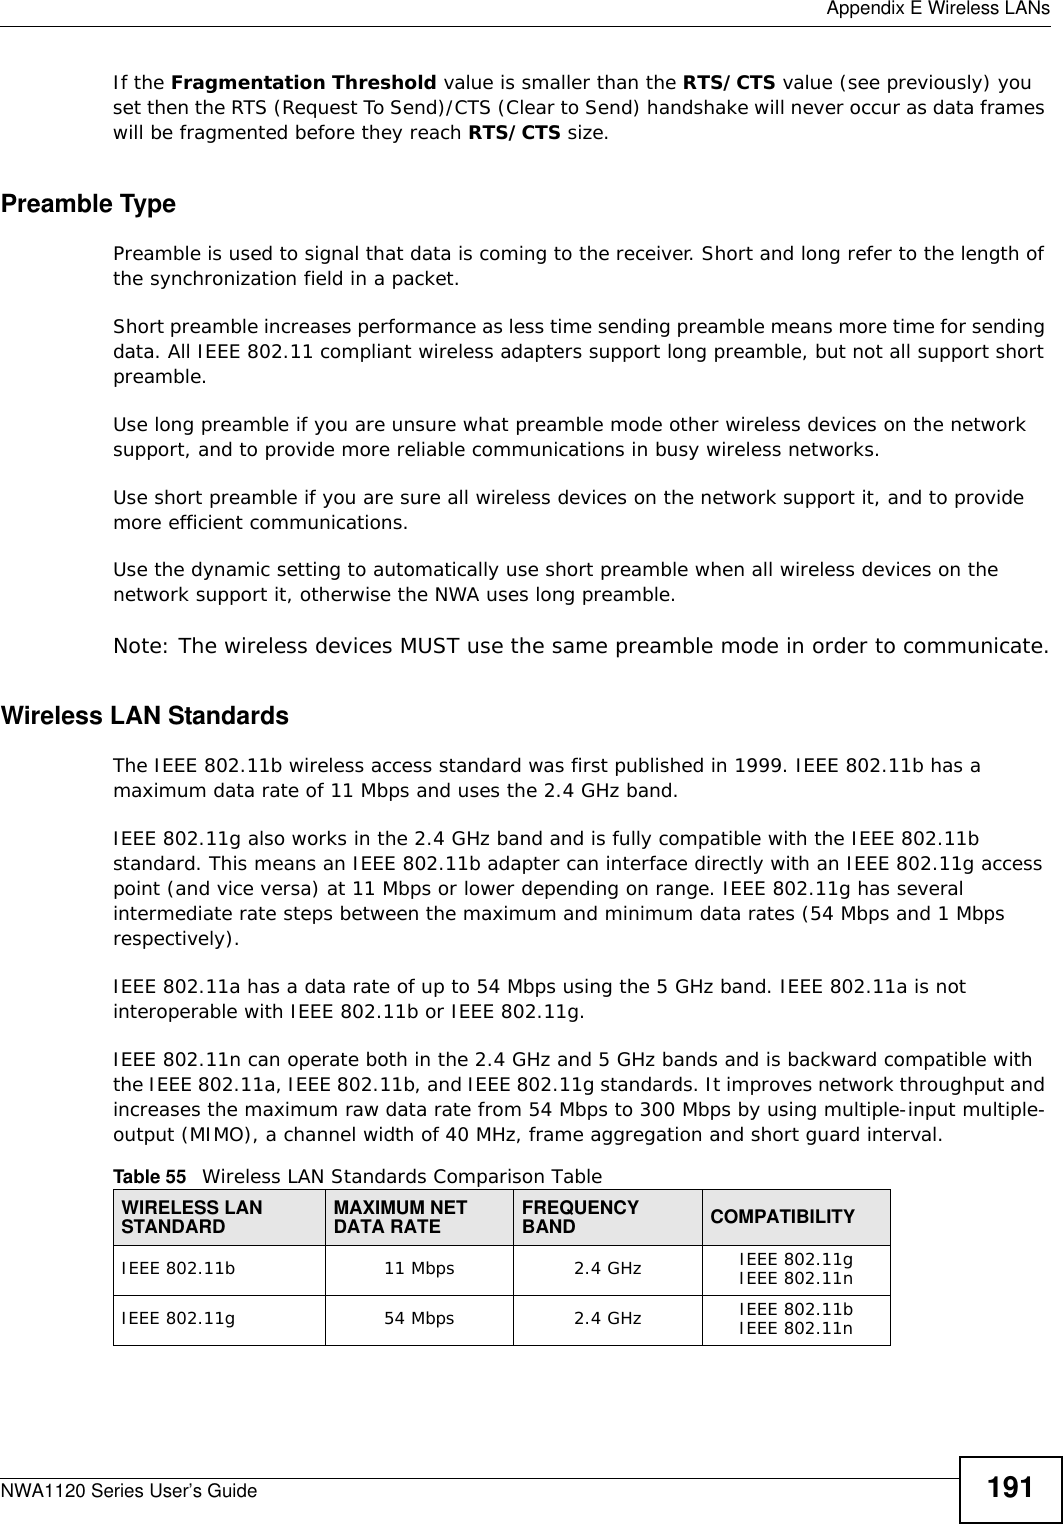  Appendix E Wireless LANsNWA1120 Series User’s Guide 191If the Fragmentation Threshold value is smaller than the RTS/CTS value (see previously) you set then the RTS (Request To Send)/CTS (Clear to Send) handshake will never occur as data frames will be fragmented before they reach RTS/CTS size.Preamble TypePreamble is used to signal that data is coming to the receiver. Short and long refer to the length of the synchronization field in a packet.Short preamble increases performance as less time sending preamble means more time for sending data. All IEEE 802.11 compliant wireless adapters support long preamble, but not all support short preamble. Use long preamble if you are unsure what preamble mode other wireless devices on the network support, and to provide more reliable communications in busy wireless networks. Use short preamble if you are sure all wireless devices on the network support it, and to provide more efficient communications.Use the dynamic setting to automatically use short preamble when all wireless devices on the network support it, otherwise the NWA uses long preamble.Note: The wireless devices MUST use the same preamble mode in order to communicate.Wireless LAN StandardsThe IEEE 802.11b wireless access standard was first published in 1999. IEEE 802.11b has a maximum data rate of 11 Mbps and uses the 2.4 GHz band.IEEE 802.11g also works in the 2.4 GHz band and is fully compatible with the IEEE 802.11b standard. This means an IEEE 802.11b adapter can interface directly with an IEEE 802.11g access point (and vice versa) at 11 Mbps or lower depending on range. IEEE 802.11g has several intermediate rate steps between the maximum and minimum data rates (54 Mbps and 1 Mbps respectively).IEEE 802.11a has a data rate of up to 54 Mbps using the 5 GHz band. IEEE 802.11a is not interoperable with IEEE 802.11b or IEEE 802.11g.IEEE 802.11n can operate both in the 2.4 GHz and 5 GHz bands and is backward compatible with the IEEE 802.11a, IEEE 802.11b, and IEEE 802.11g standards. It improves network throughput and increases the maximum raw data rate from 54 Mbps to 300 Mbps by using multiple-input multiple-output (MIMO), a channel width of 40 MHz, frame aggregation and short guard interval.Table 55   Wireless LAN Standards Comparison TableWIRELESS LAN STANDARD MAXIMUM NET DATA RATE FREQUENCY BAND COMPATIBILITYIEEE 802.11b 11 Mbps 2.4 GHz IEEE 802.11gIEEE 802.11nIEEE 802.11g 54 Mbps 2.4 GHz IEEE 802.11bIEEE 802.11n